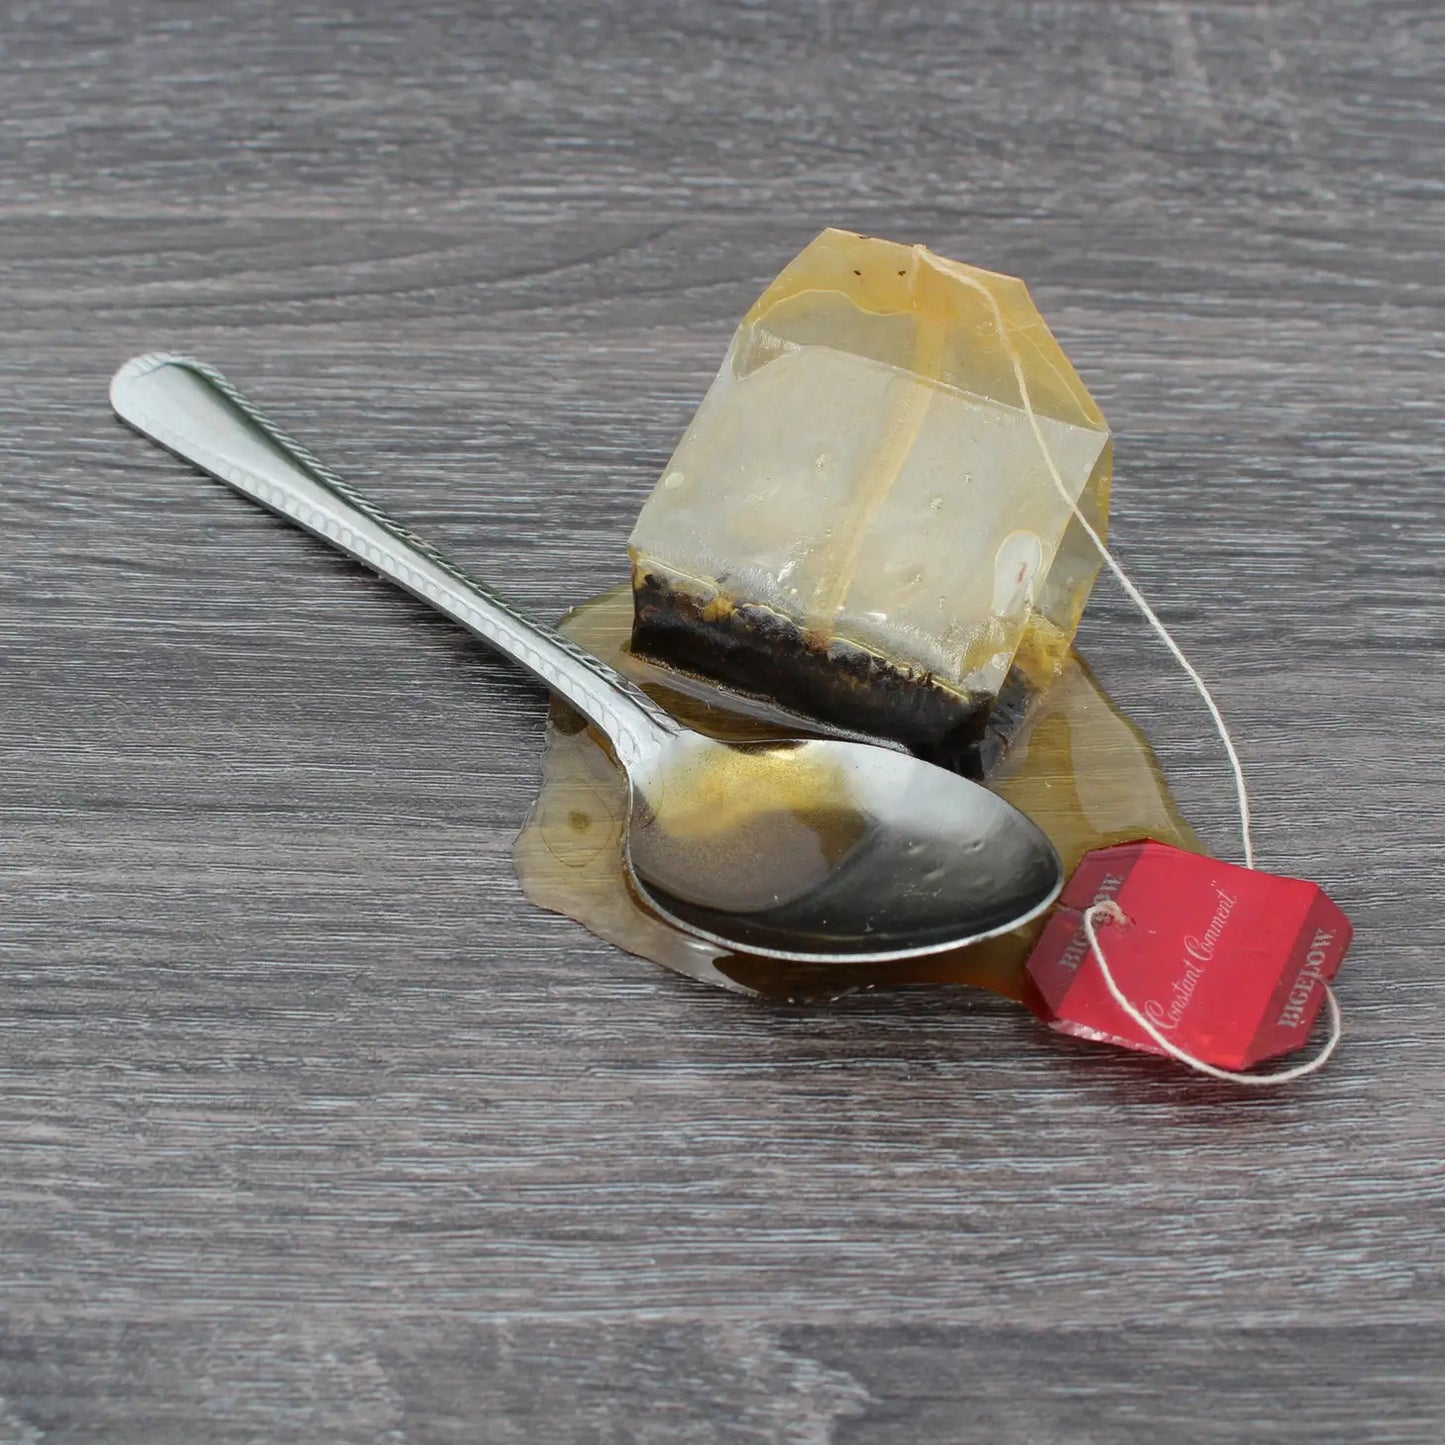 Tea Spoon and Tea Bag in Fake Spill